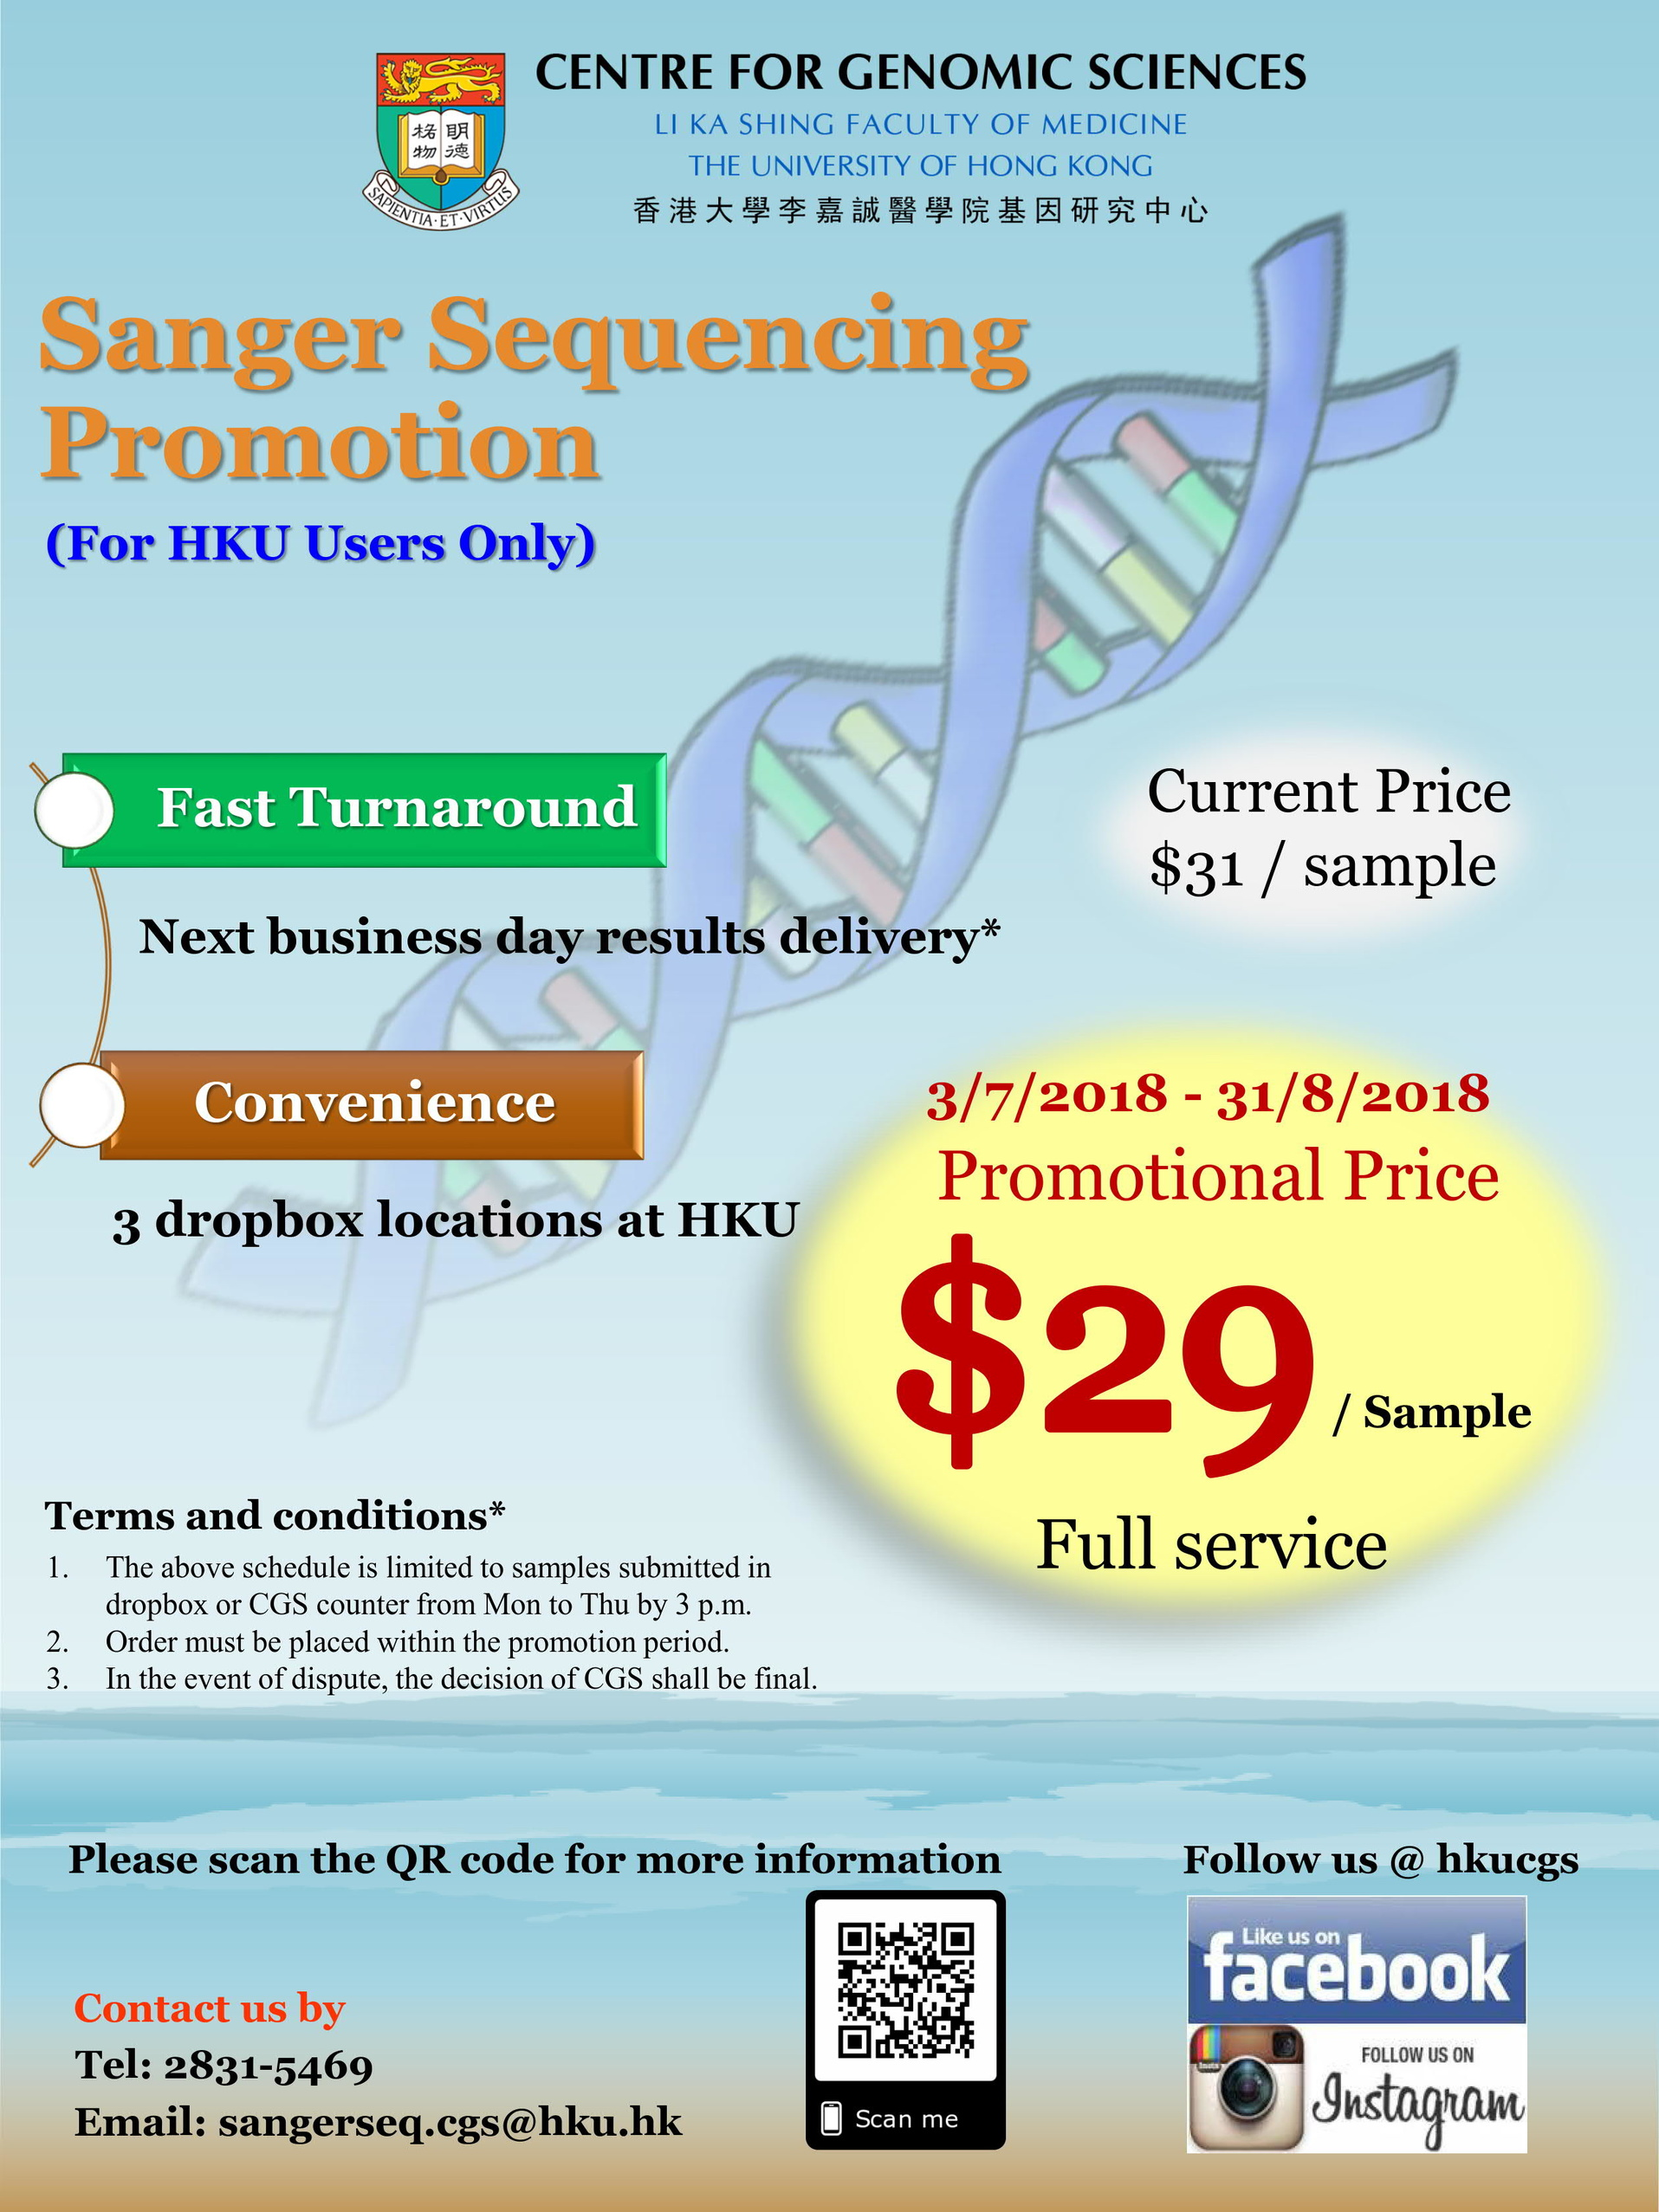 CGS Sanger Sequencing Promotion: $29 per sample (full service)